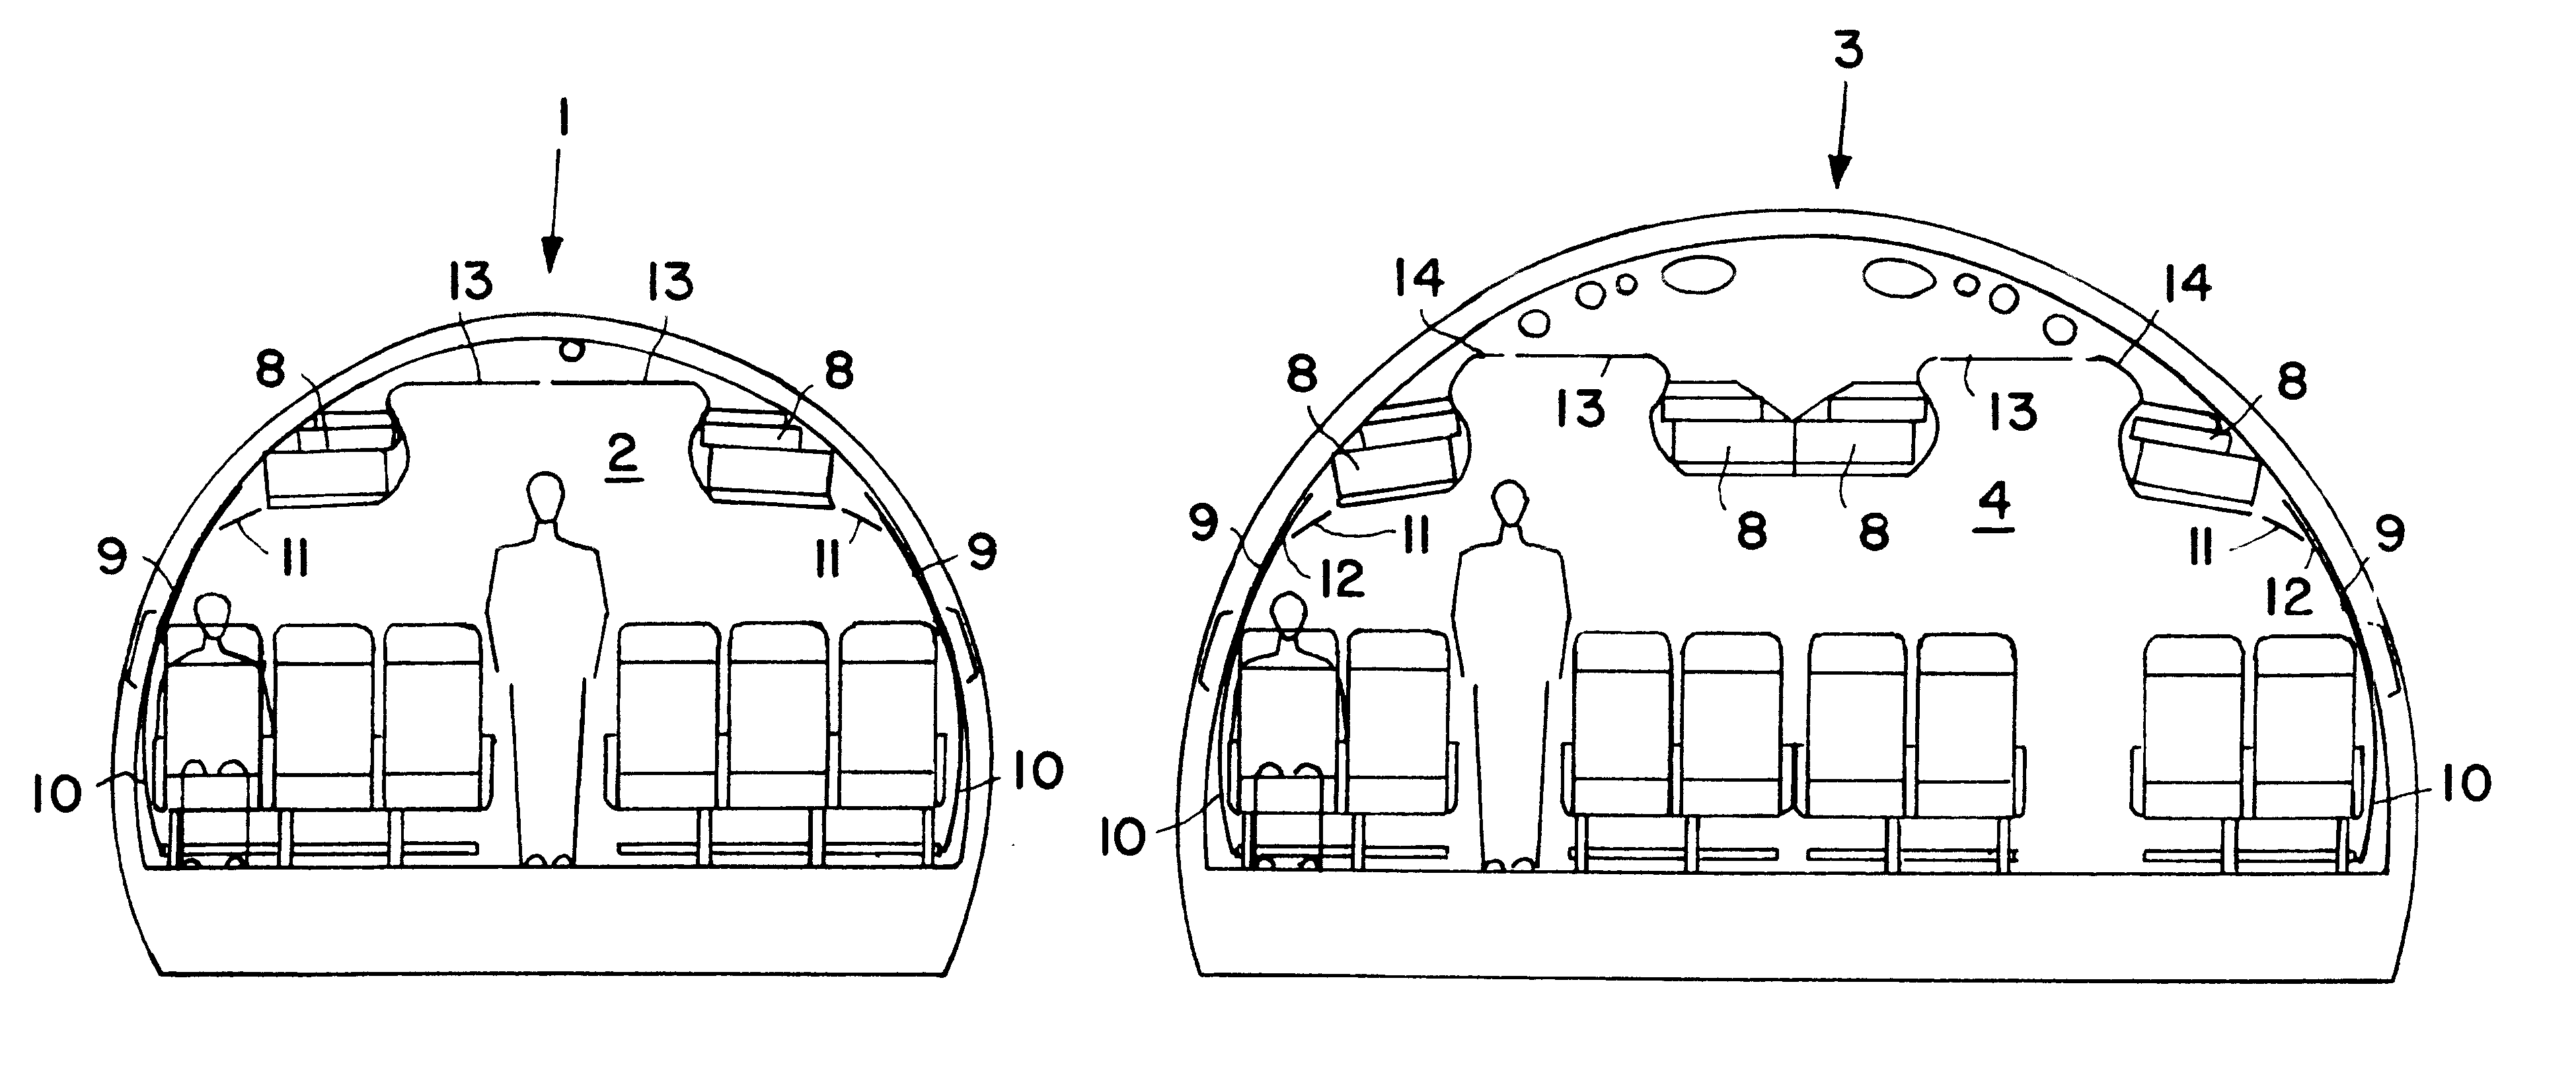 Modular trim paneling and outfitting system for an aircraft passenger cabin interior